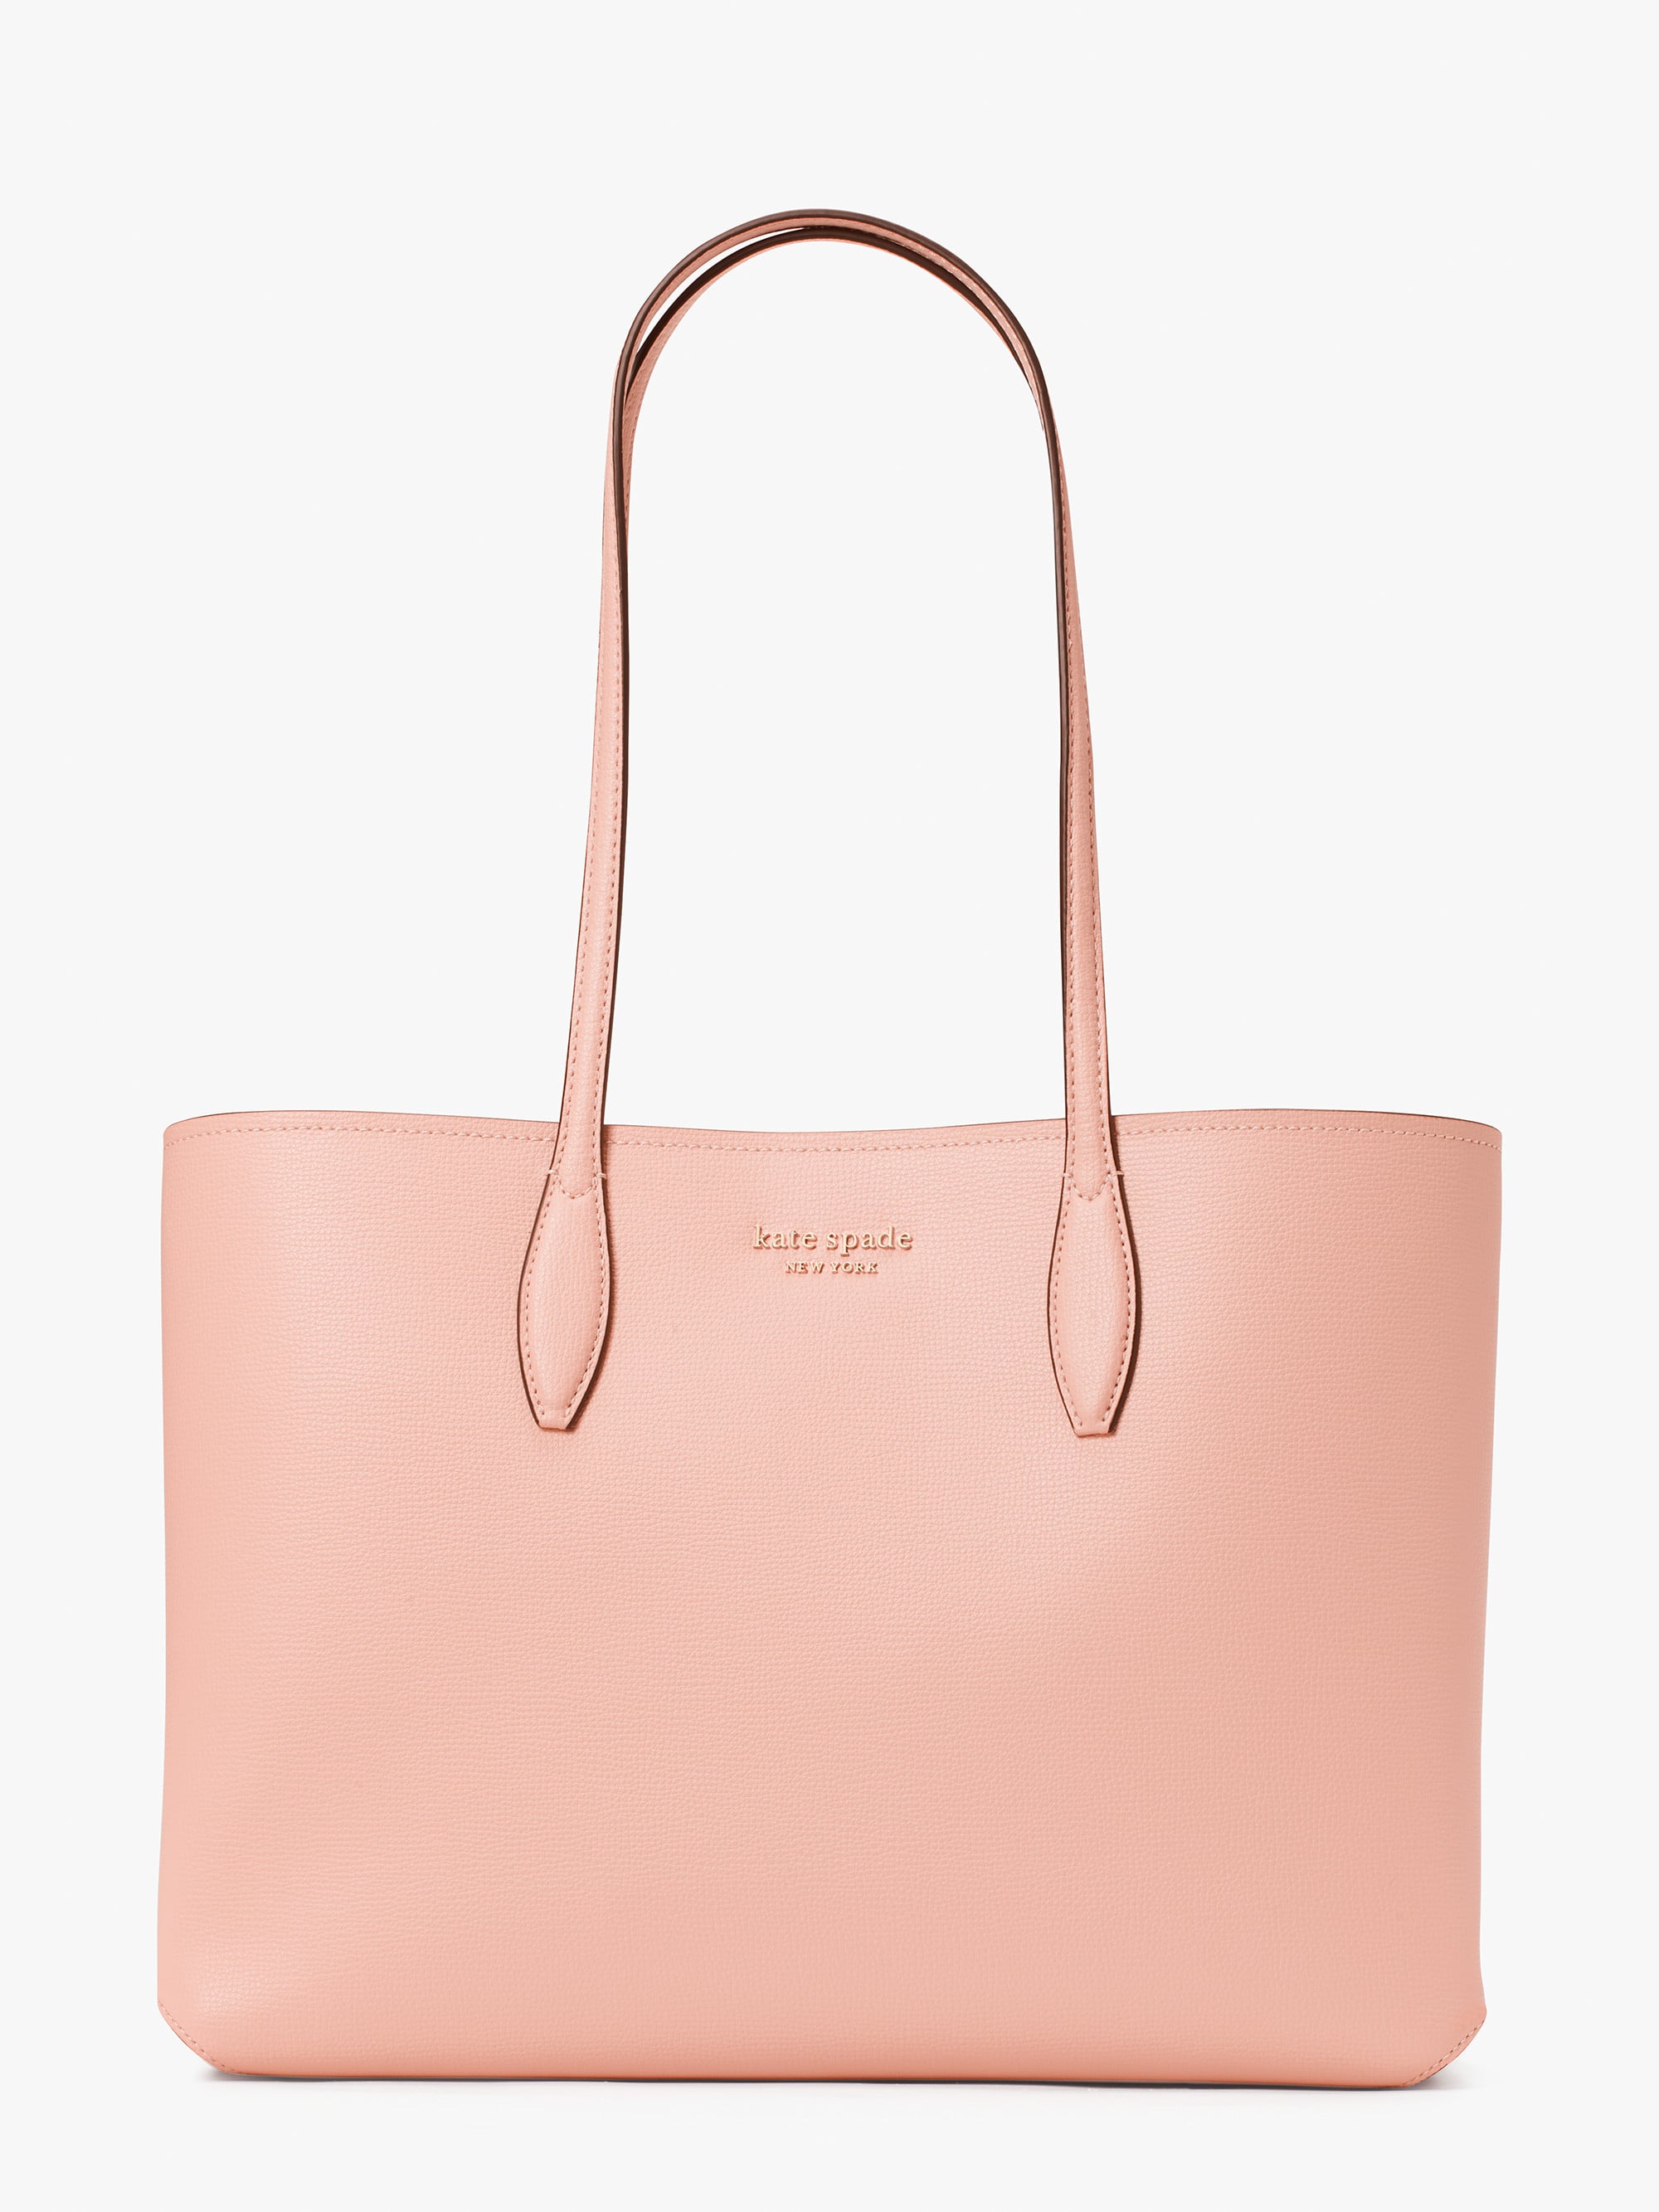 Best Bags From the Kate Spade New York Spring Sale 2022 | POPSUGAR Fashion